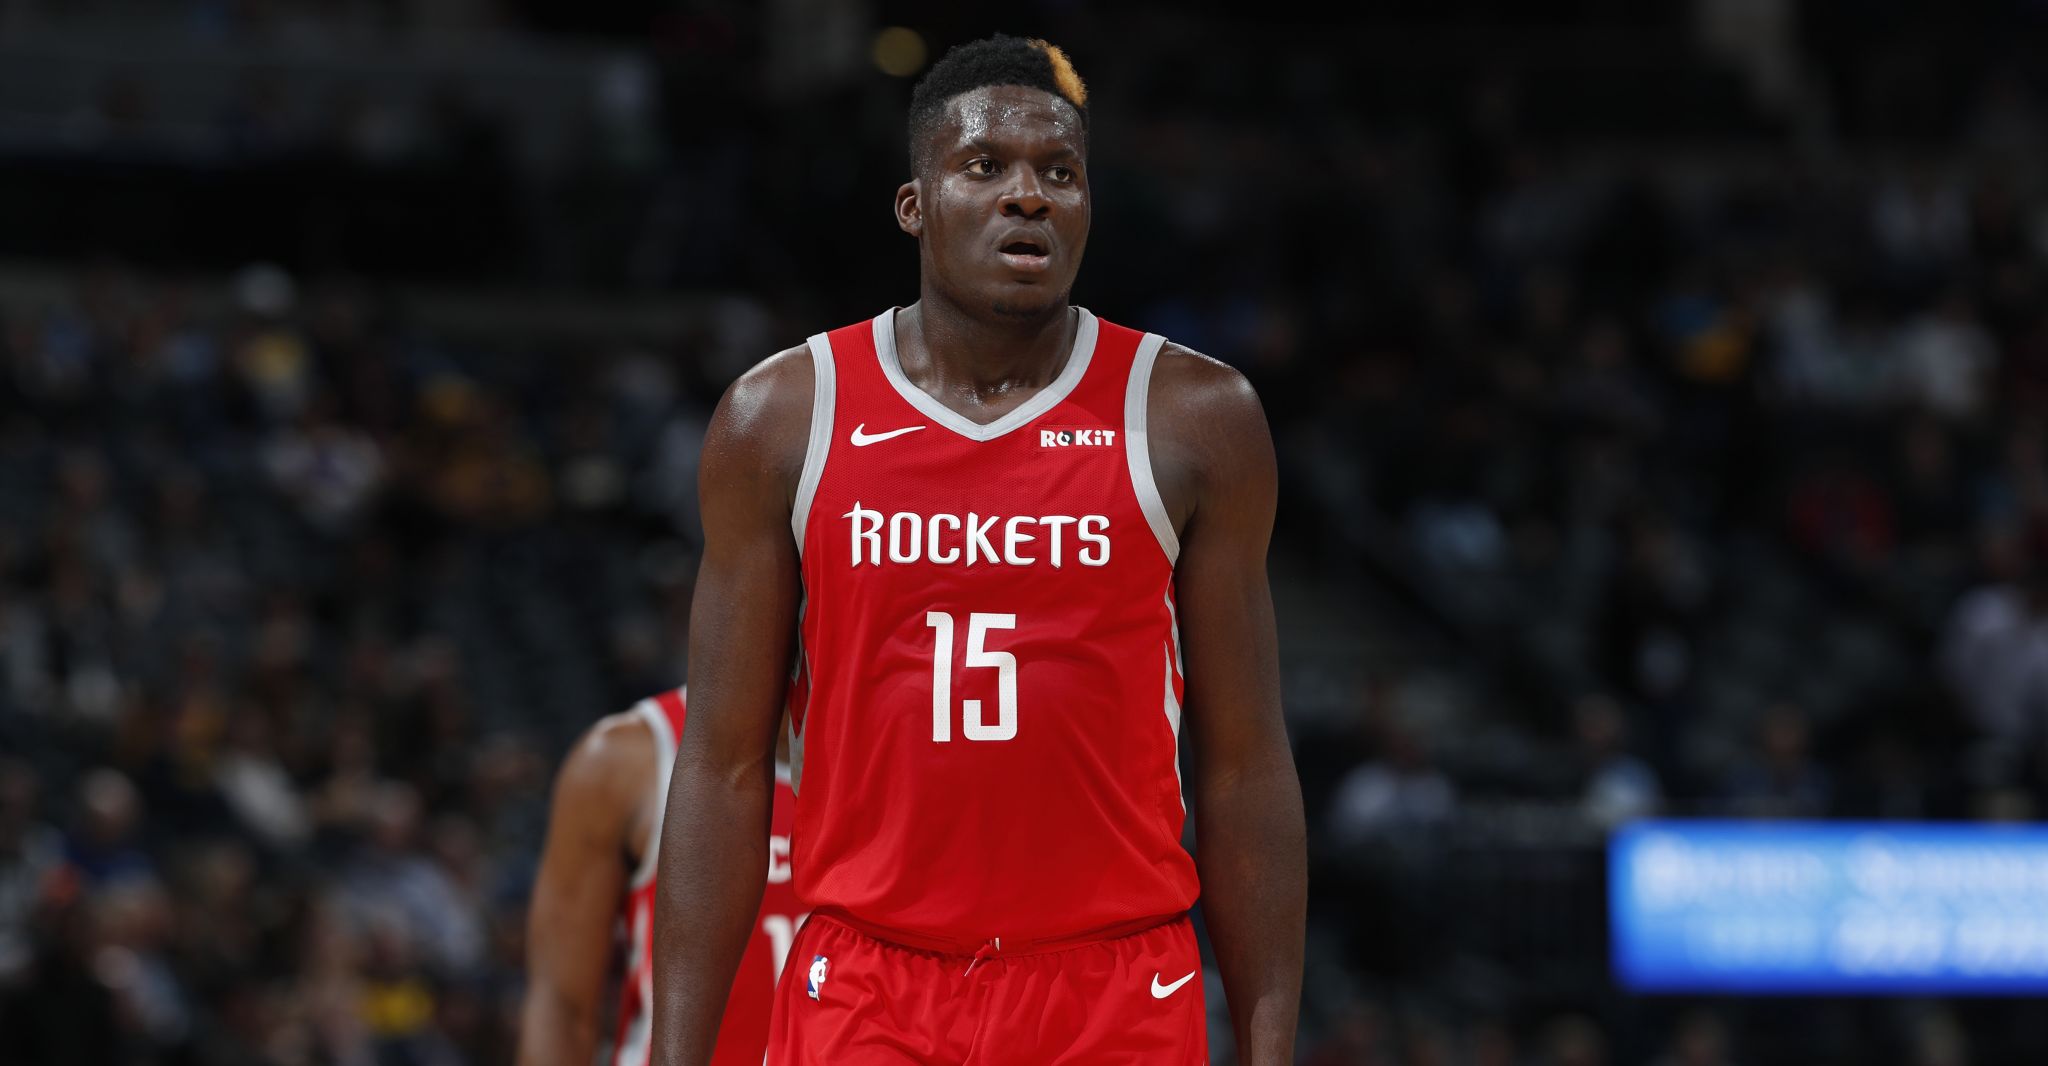 Rockets' Clint Capela out 4-6 weeks with thumb injury - HoustonChronicle.com2048 x 1066